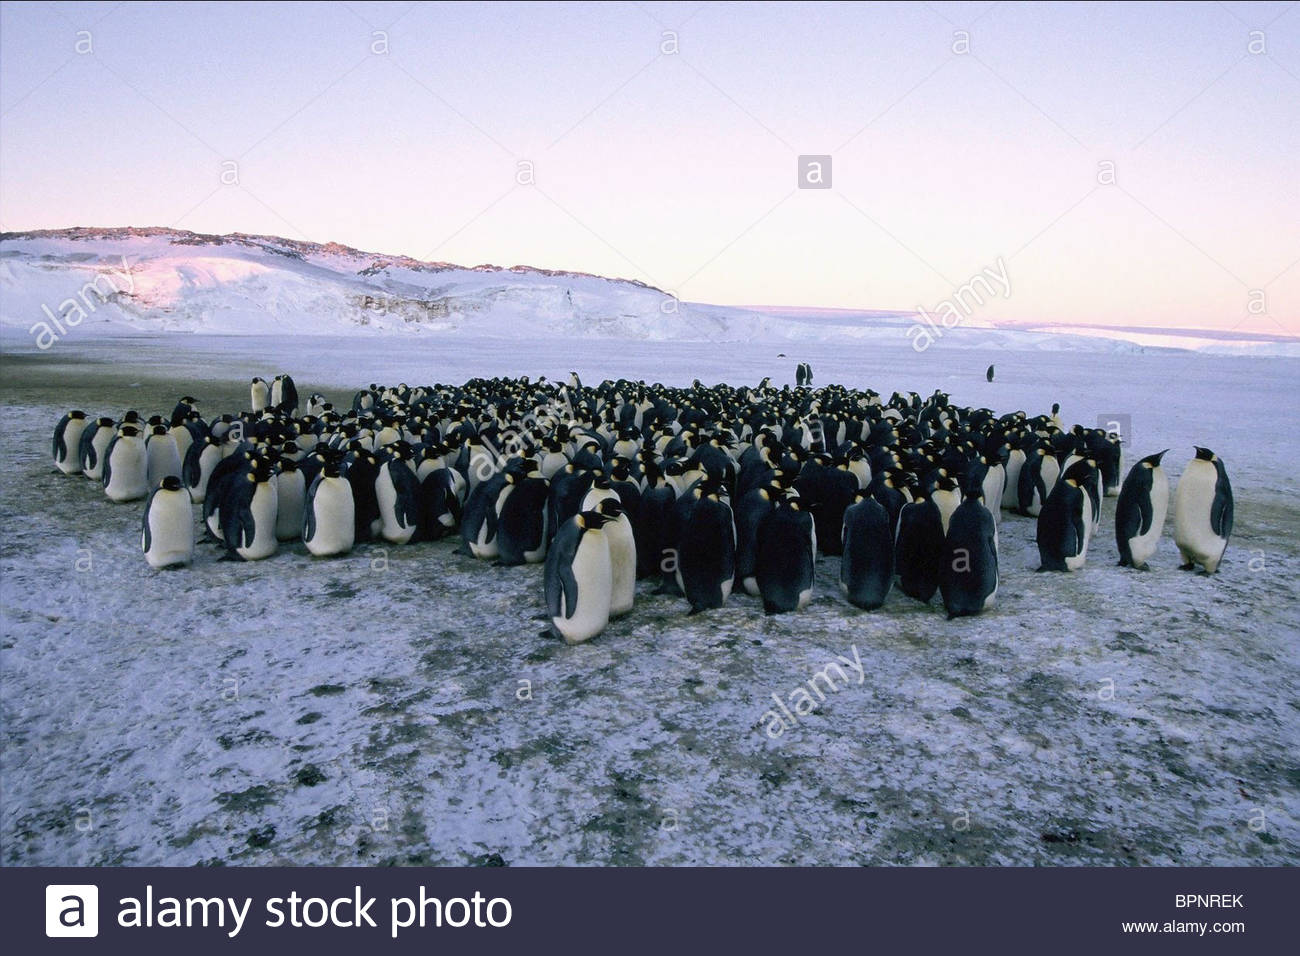 Images of March Of The Penguins | 1300x956